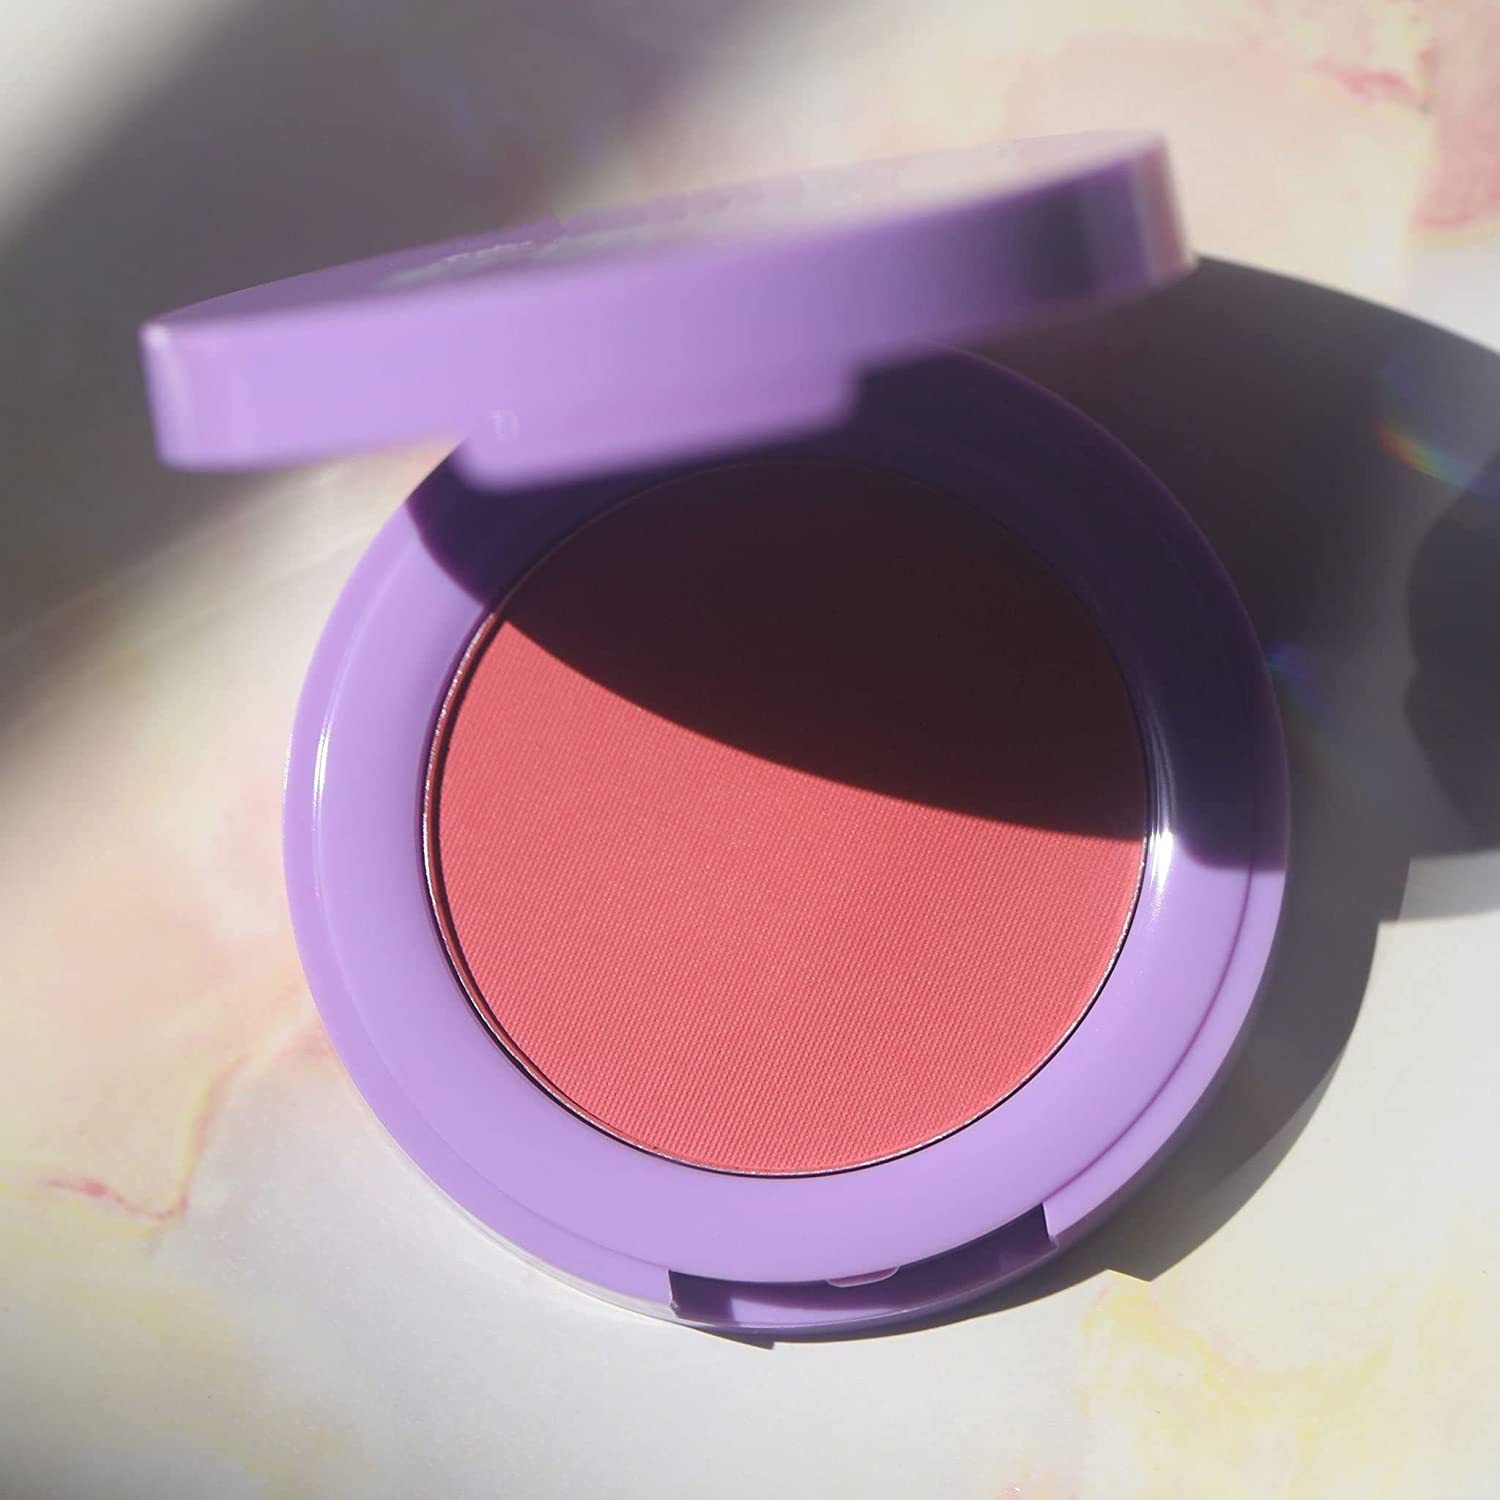 Half Caked In Bloom Powder Blush- Freshly Squeezed